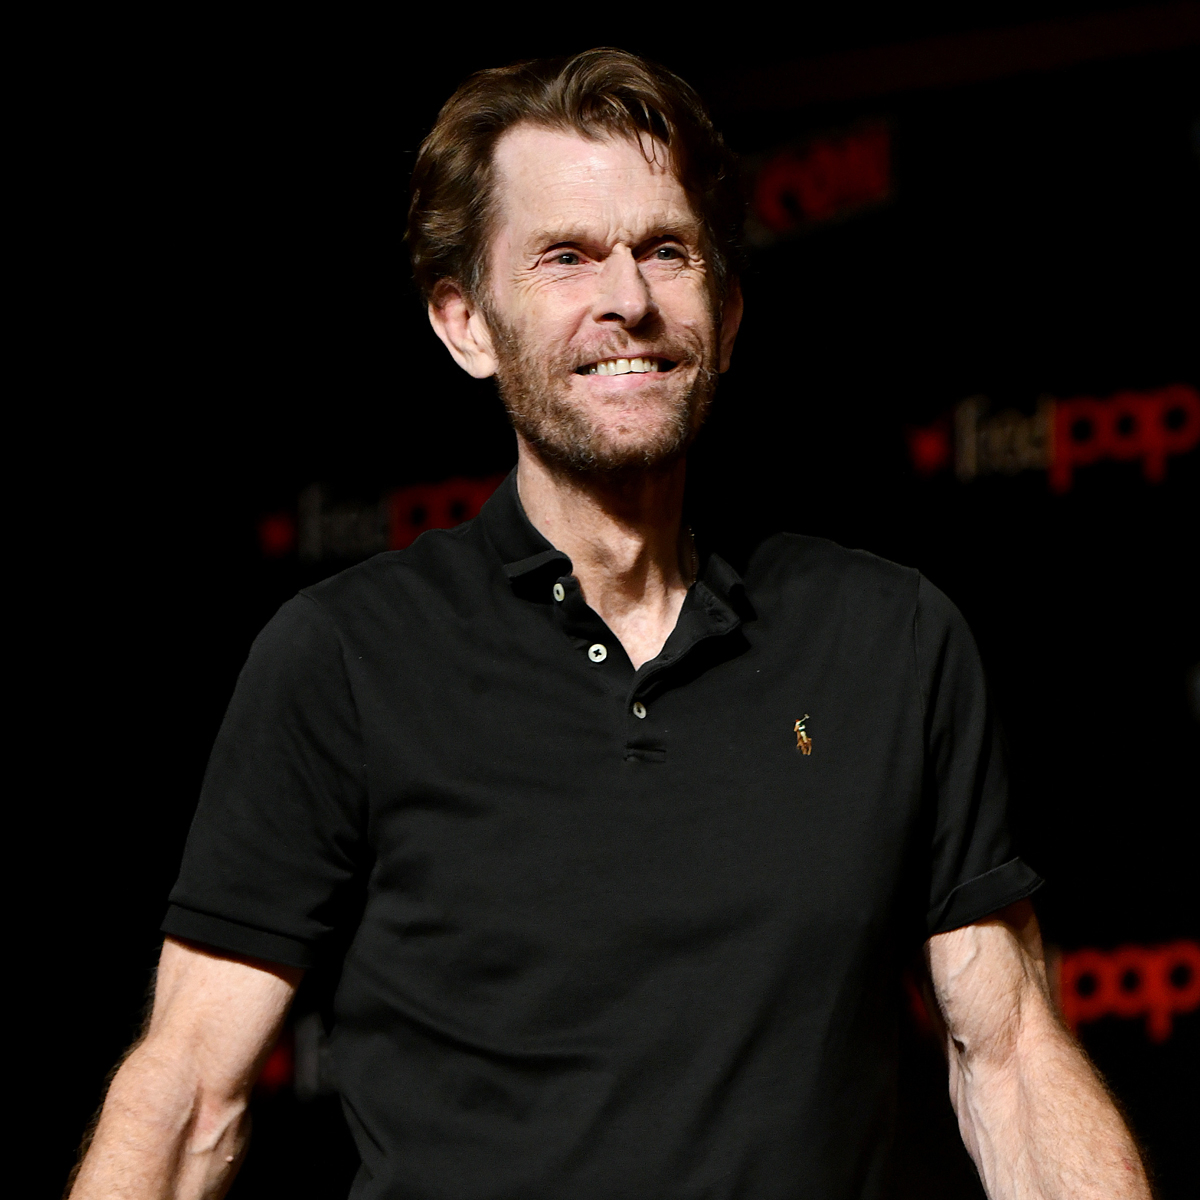 Kevin Conroy, Iconic Voice of Batman, Passes Away at 66